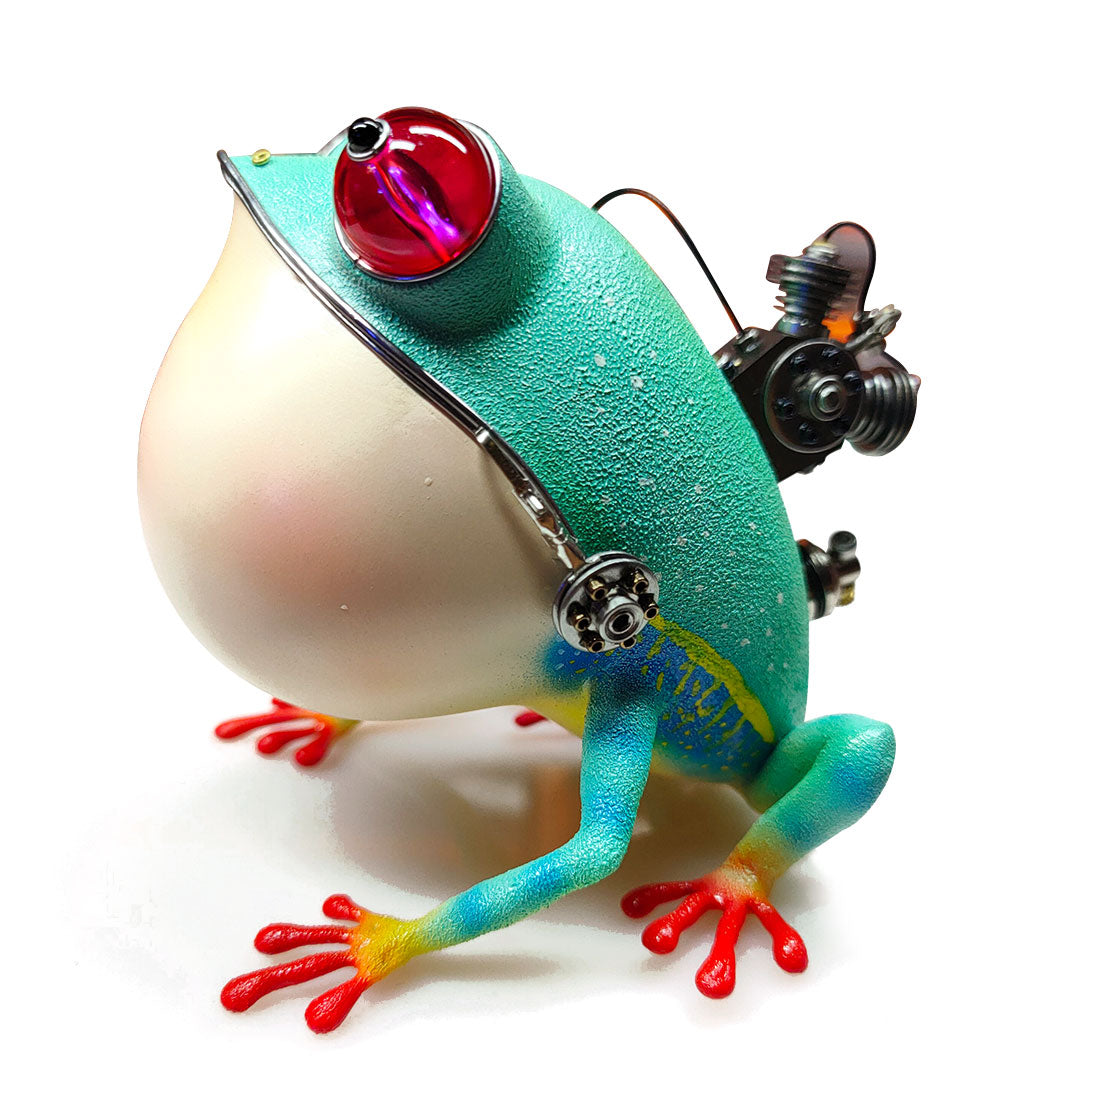 Steampunk Angry Frog Metal Art Craft Model